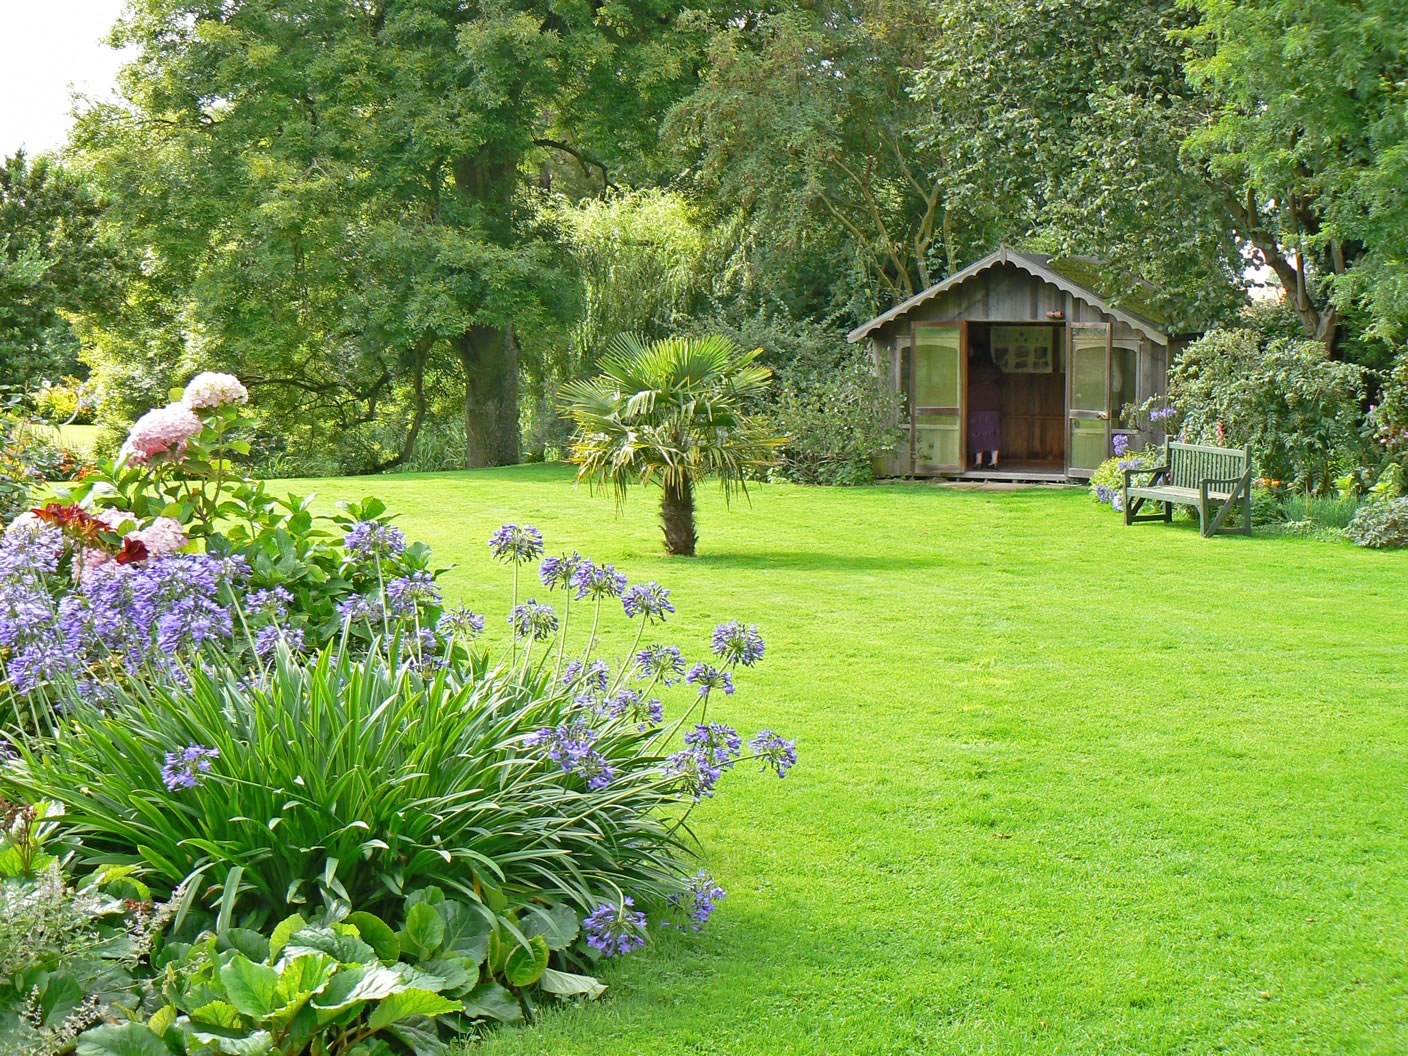 Neat Green Garden Amazing Neat Green Grass Of Garden Design Ideas Furnished With Various Plants Completed With Green Bench And Contemporary Garden Shed Garden Garden Design Ideas As The Additional Decoration For Enhancing House